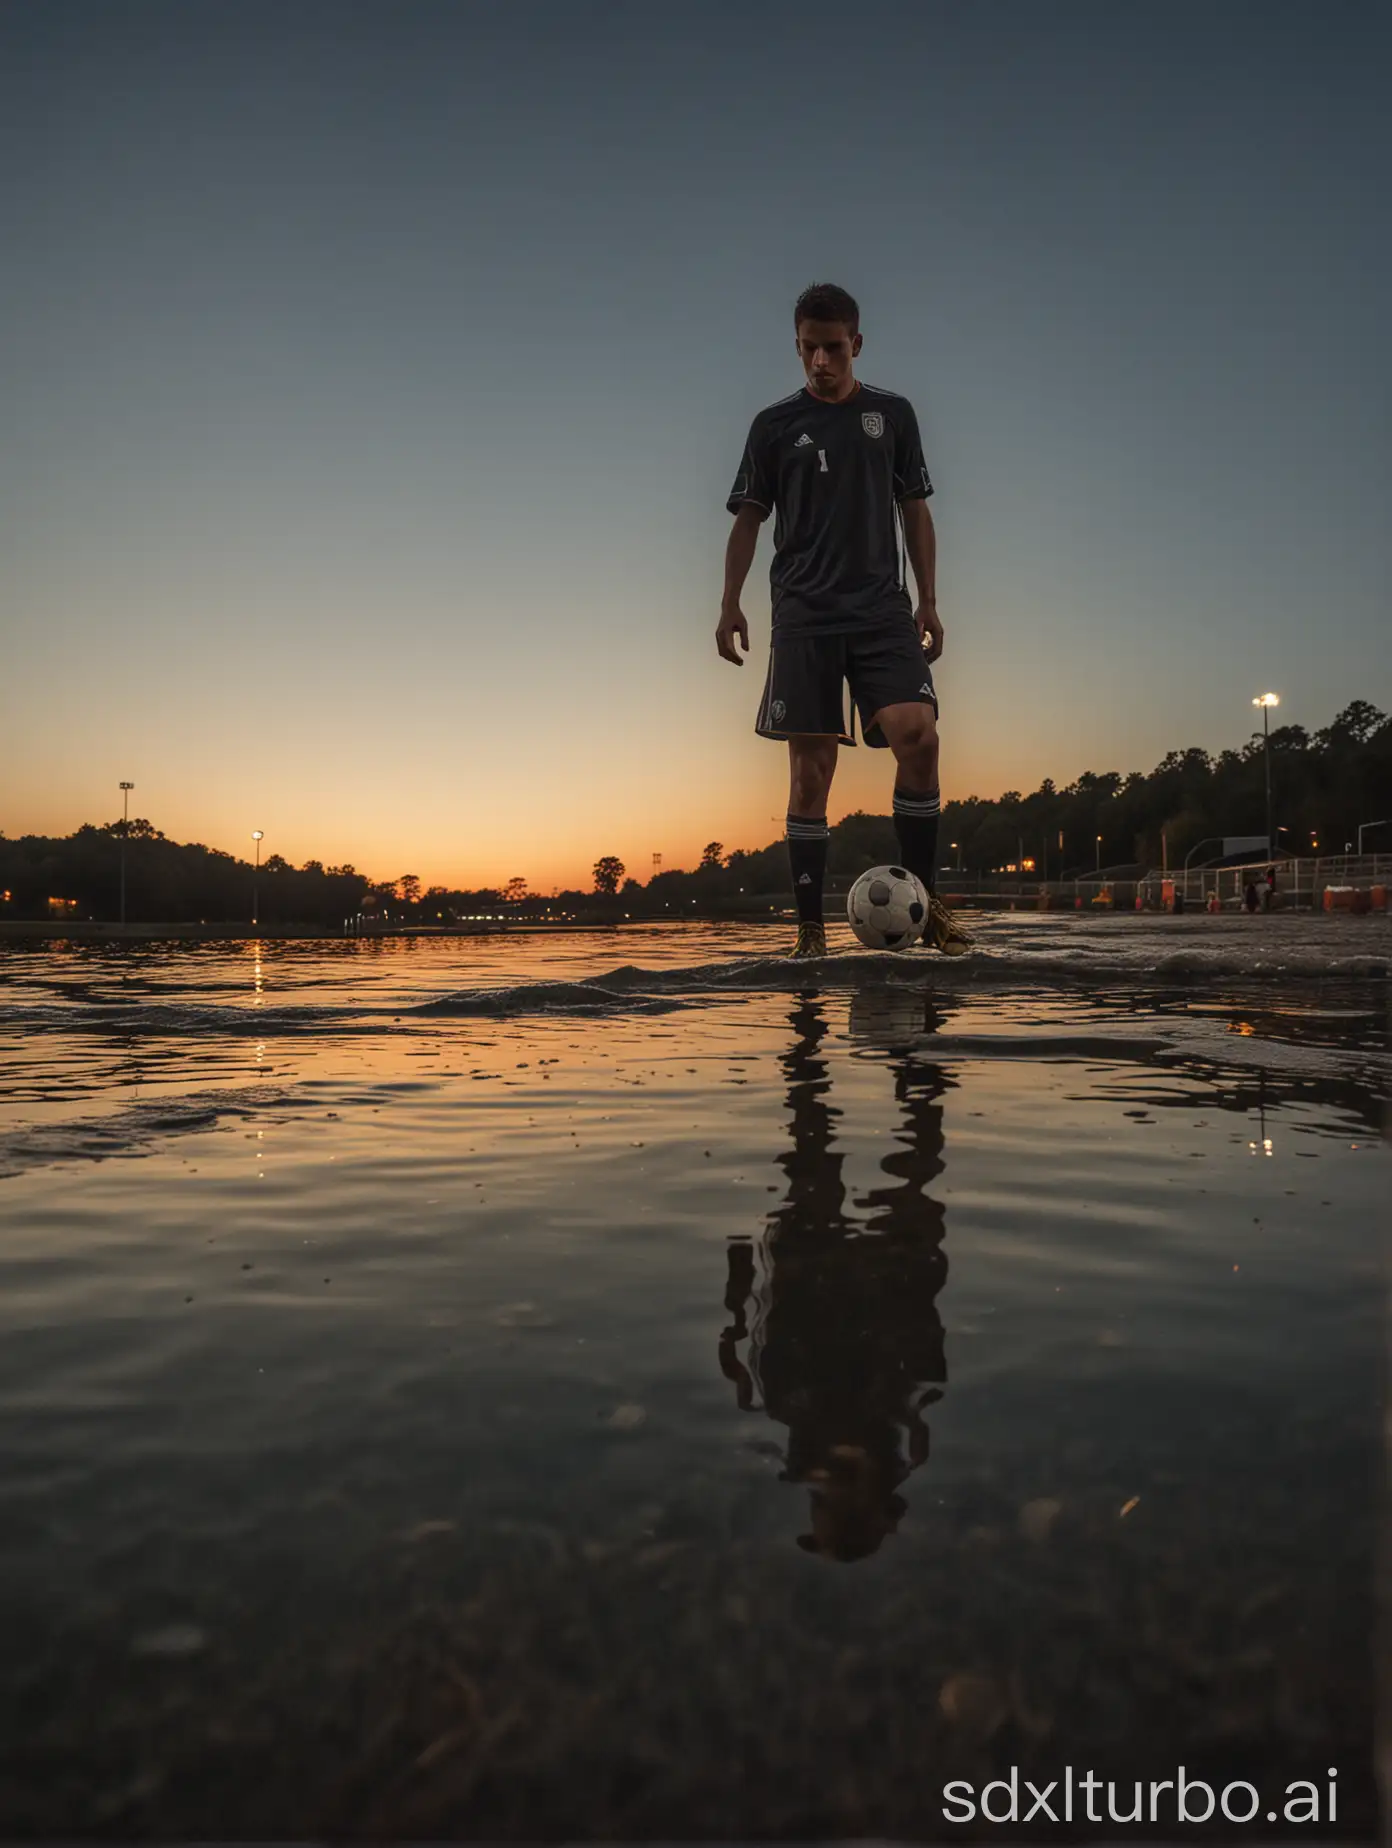 A closeup of a soccer player captured with a wideangle lens at dusk. A moment of loneliness and contemplation mood with water reflection. --ar 85:128 --v 6.0 --style raw